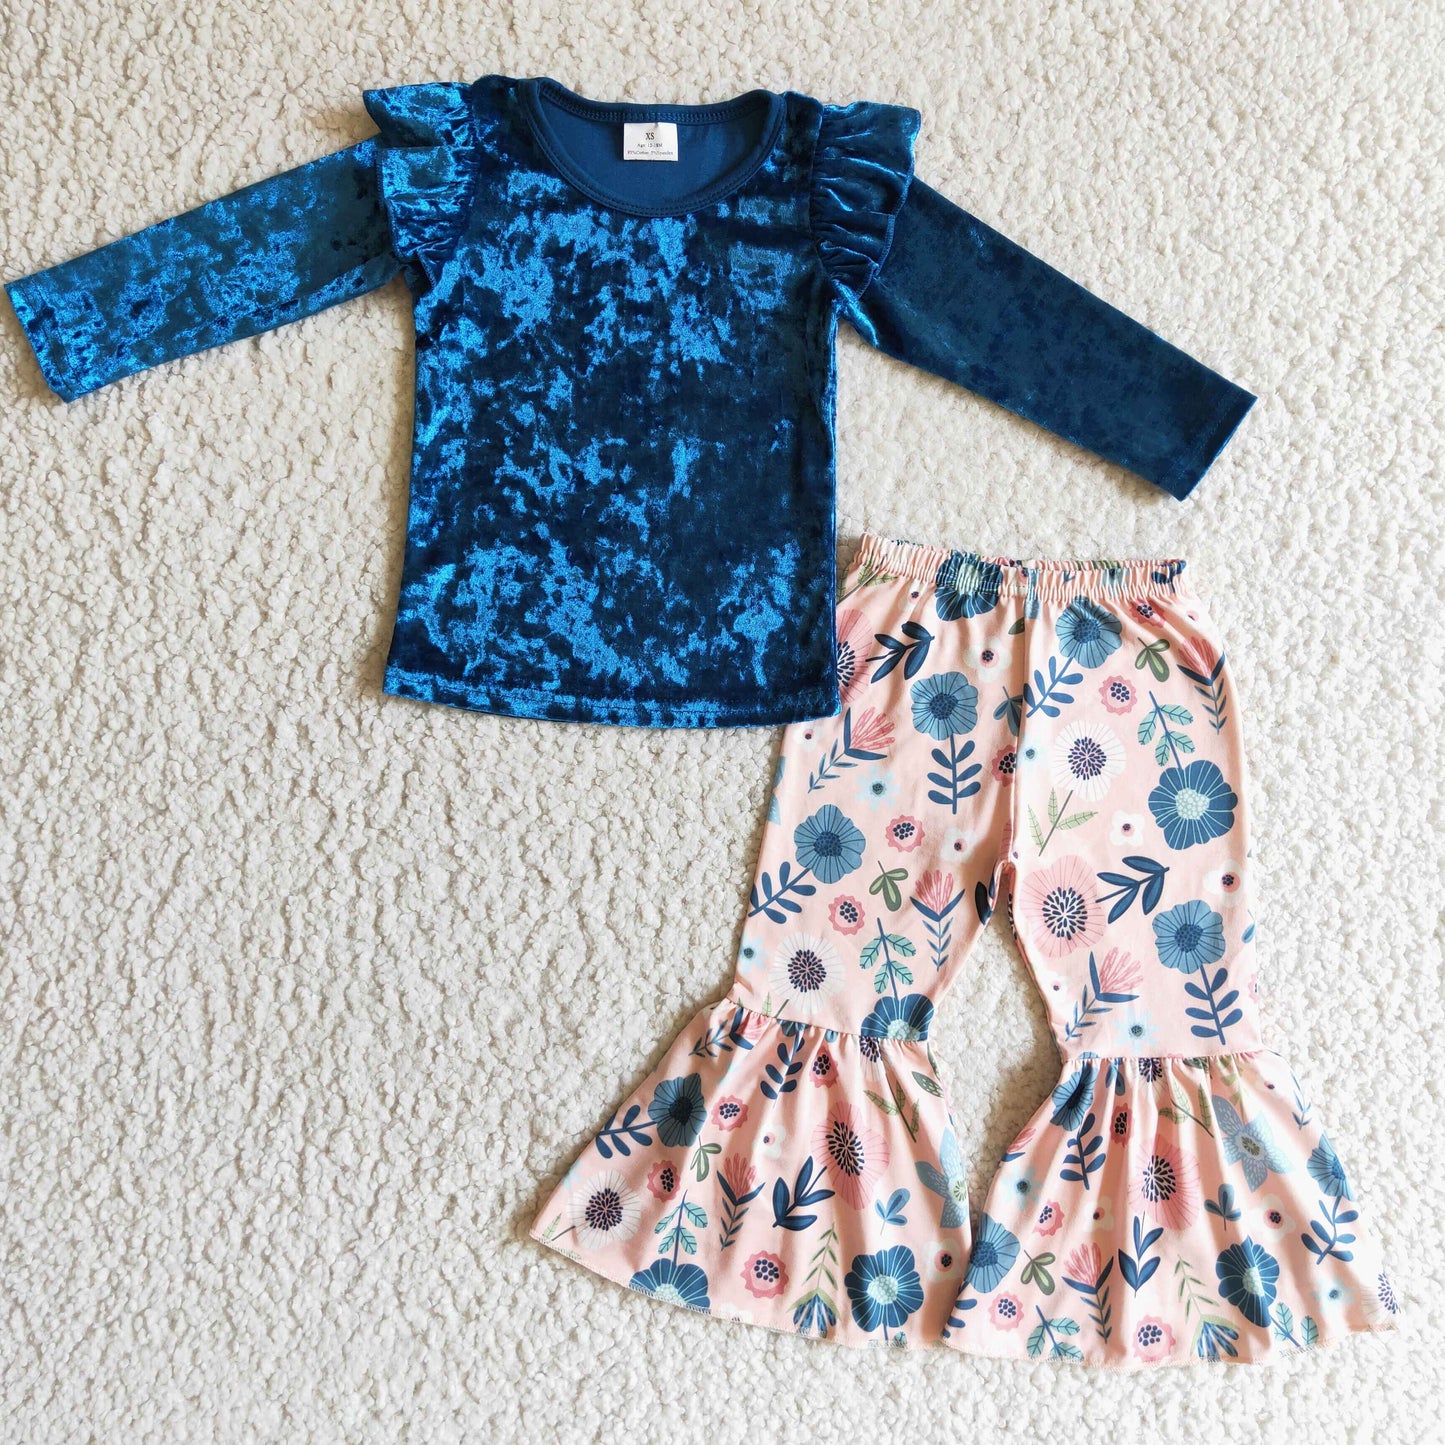 girls fall clothing blue velvet top floral outfit